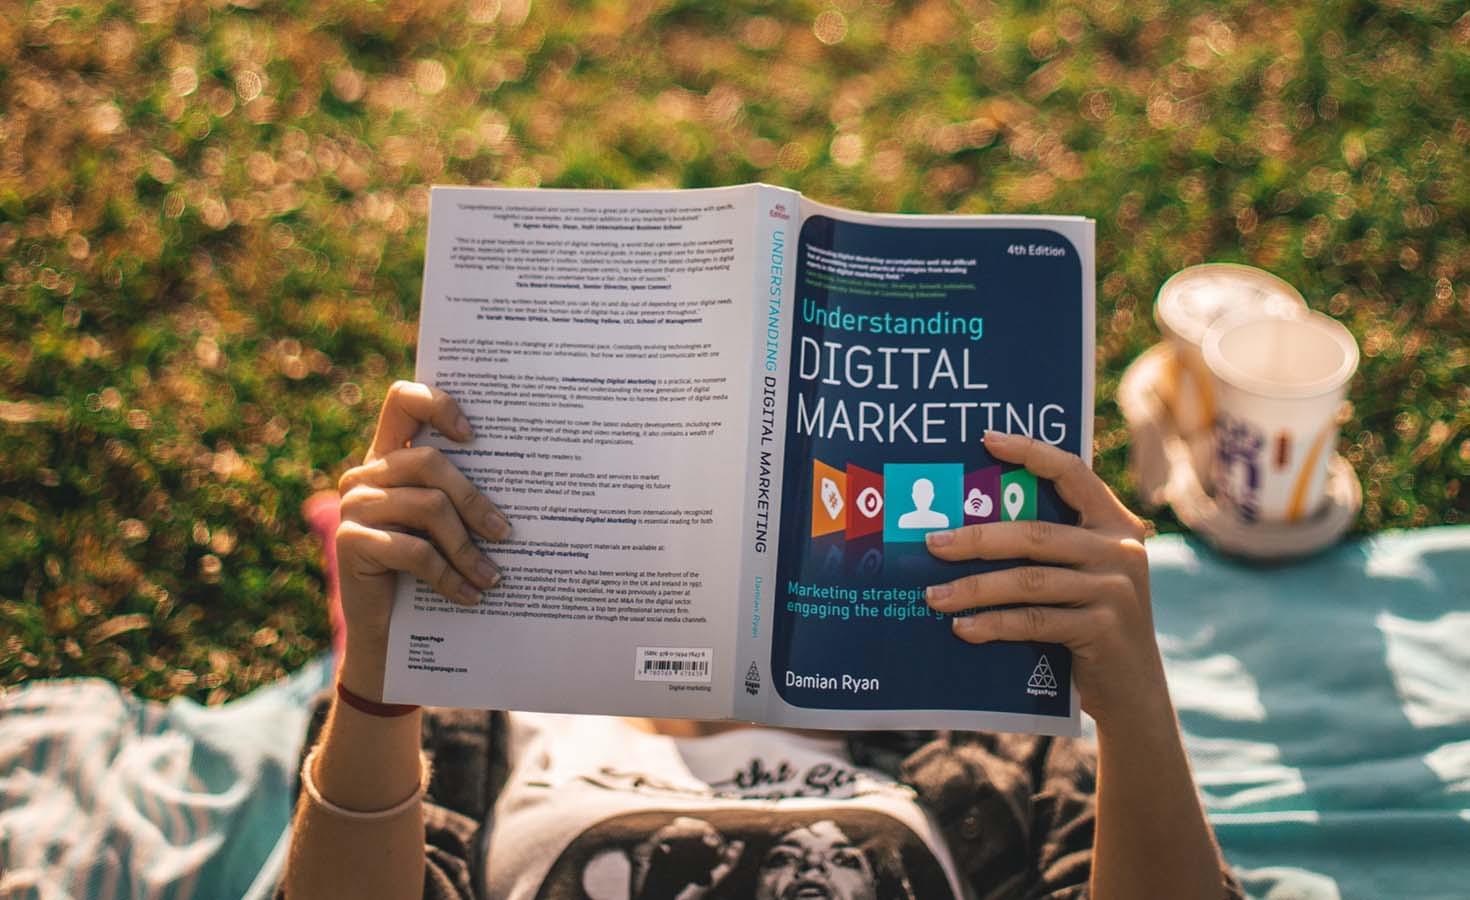 Person reading "Digital Marketing" book outside.